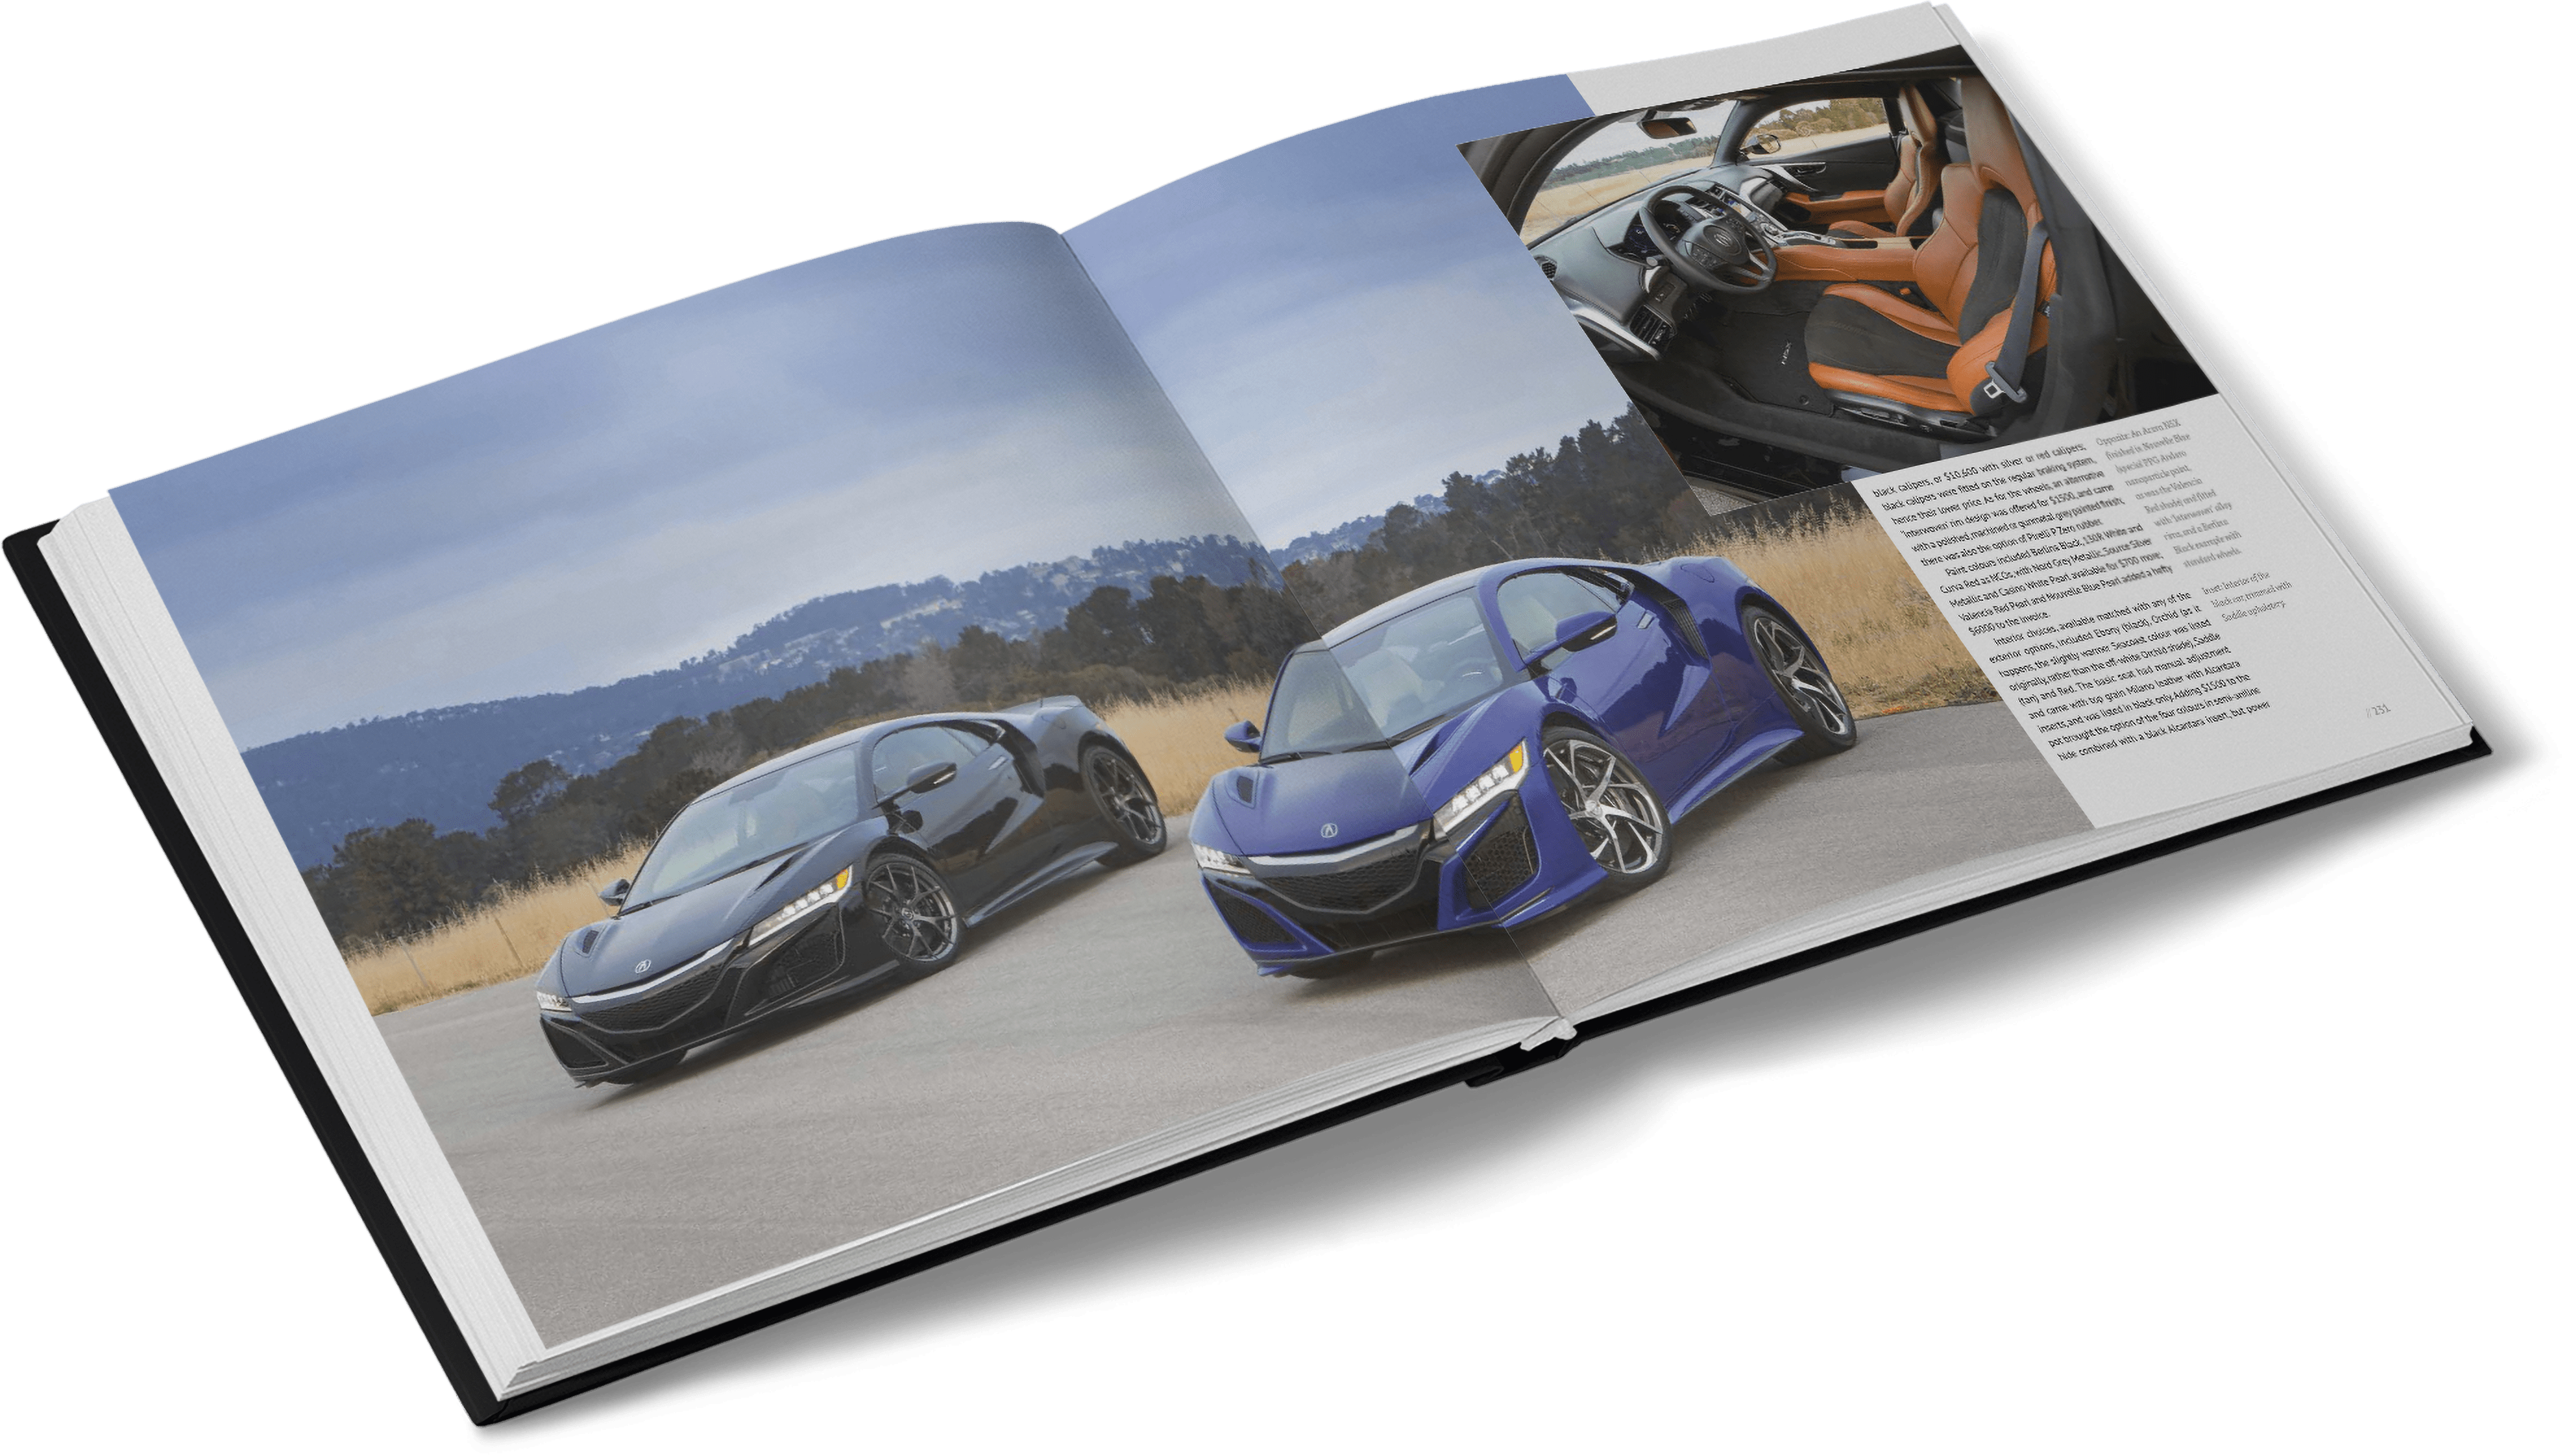 Sample spread of Honda/Acura NSX by Brian Long. Limited Edition of 500 copies ONLY available from Veloce Publishing.s good for SEO